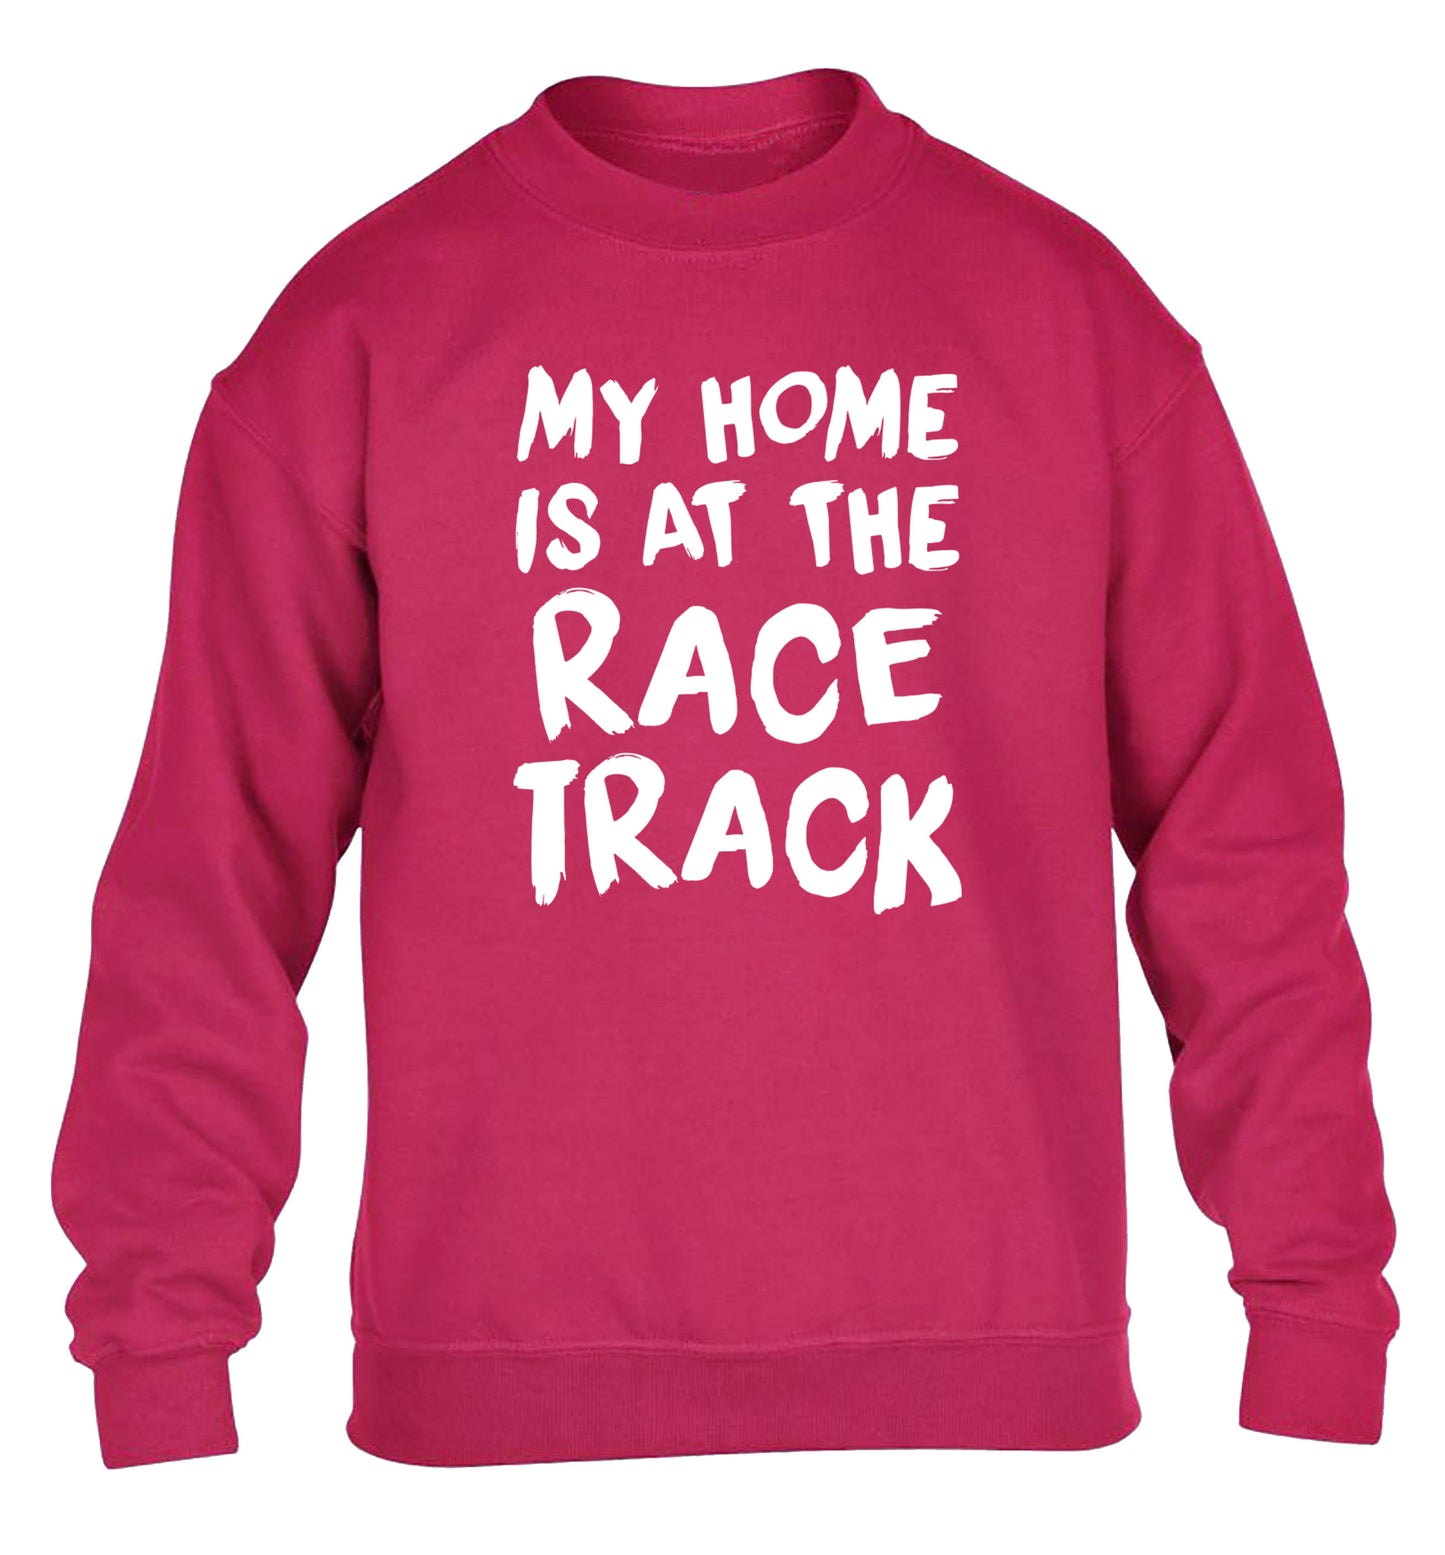 My home is at the race track children's pink sweater 12-14 Years